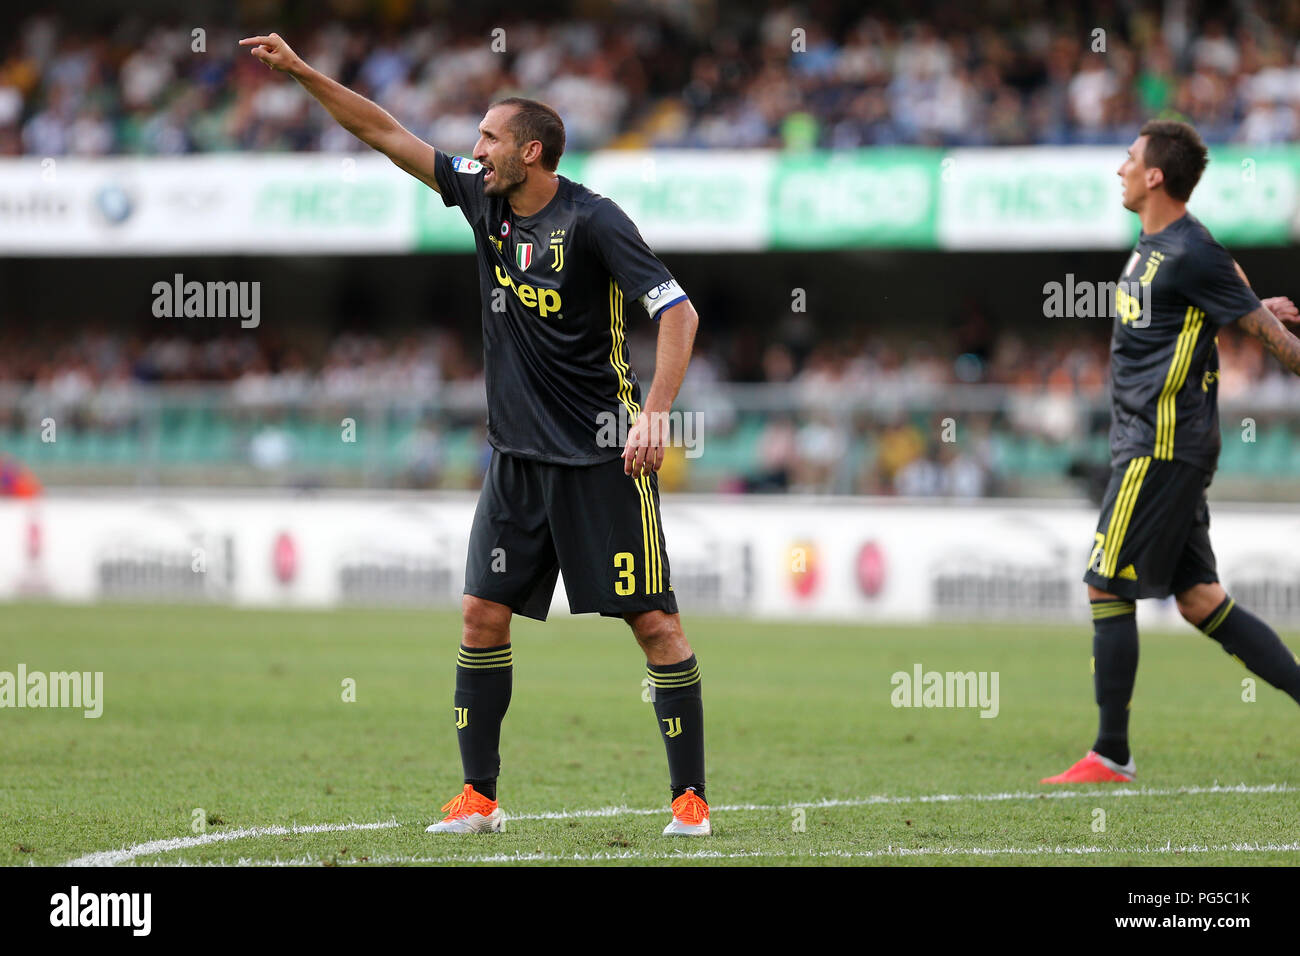 Giorgio Chiellini of Juventus FC gestures during the Serie A football match between Ac Chievo Verona and Juventus Fc. Stock Photo